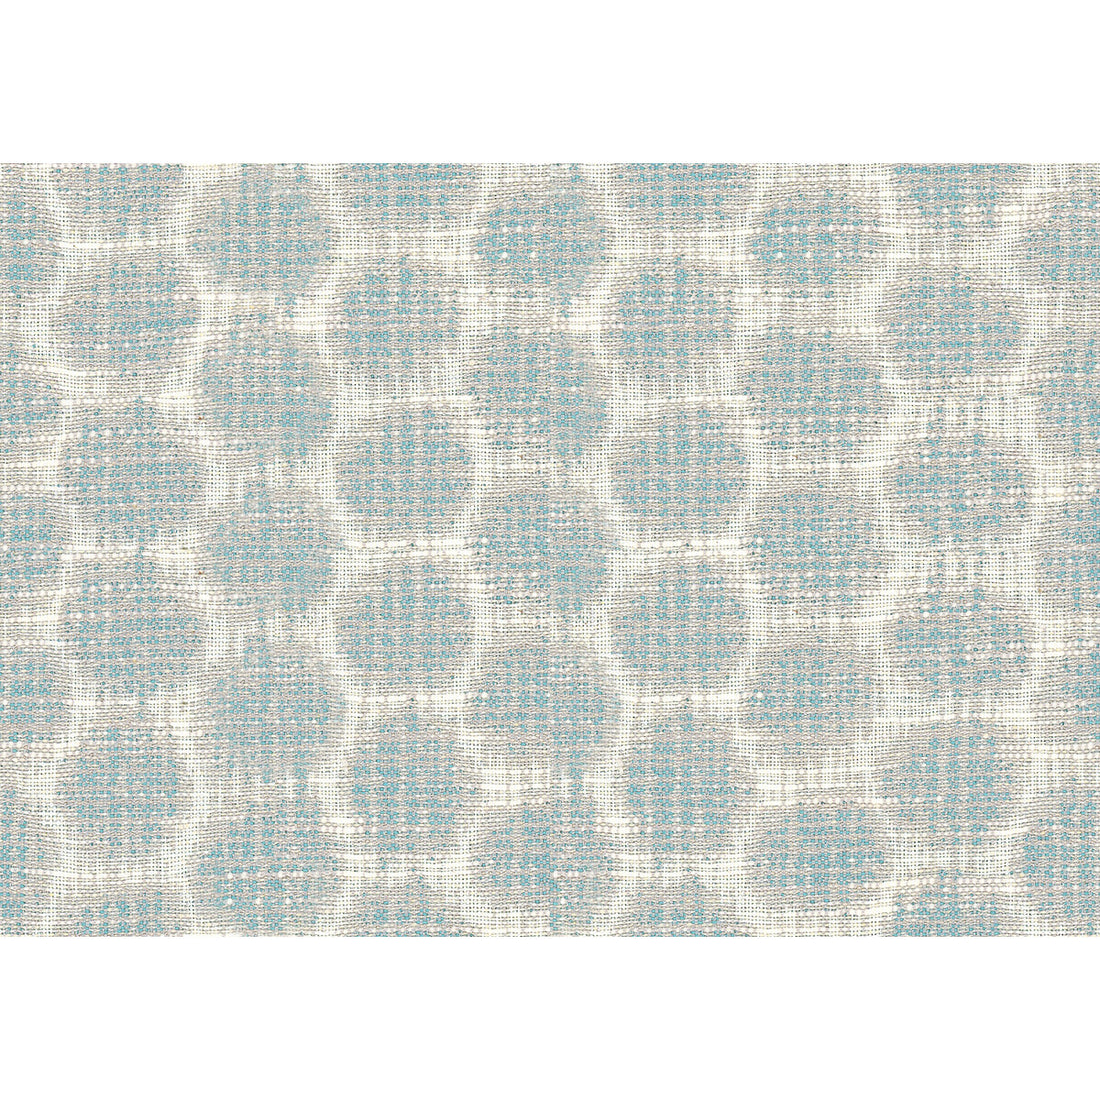 Kravet Smart fabric in 33134-1613 color - pattern 33134.1613.0 - by Kravet Smart in the Echo collection